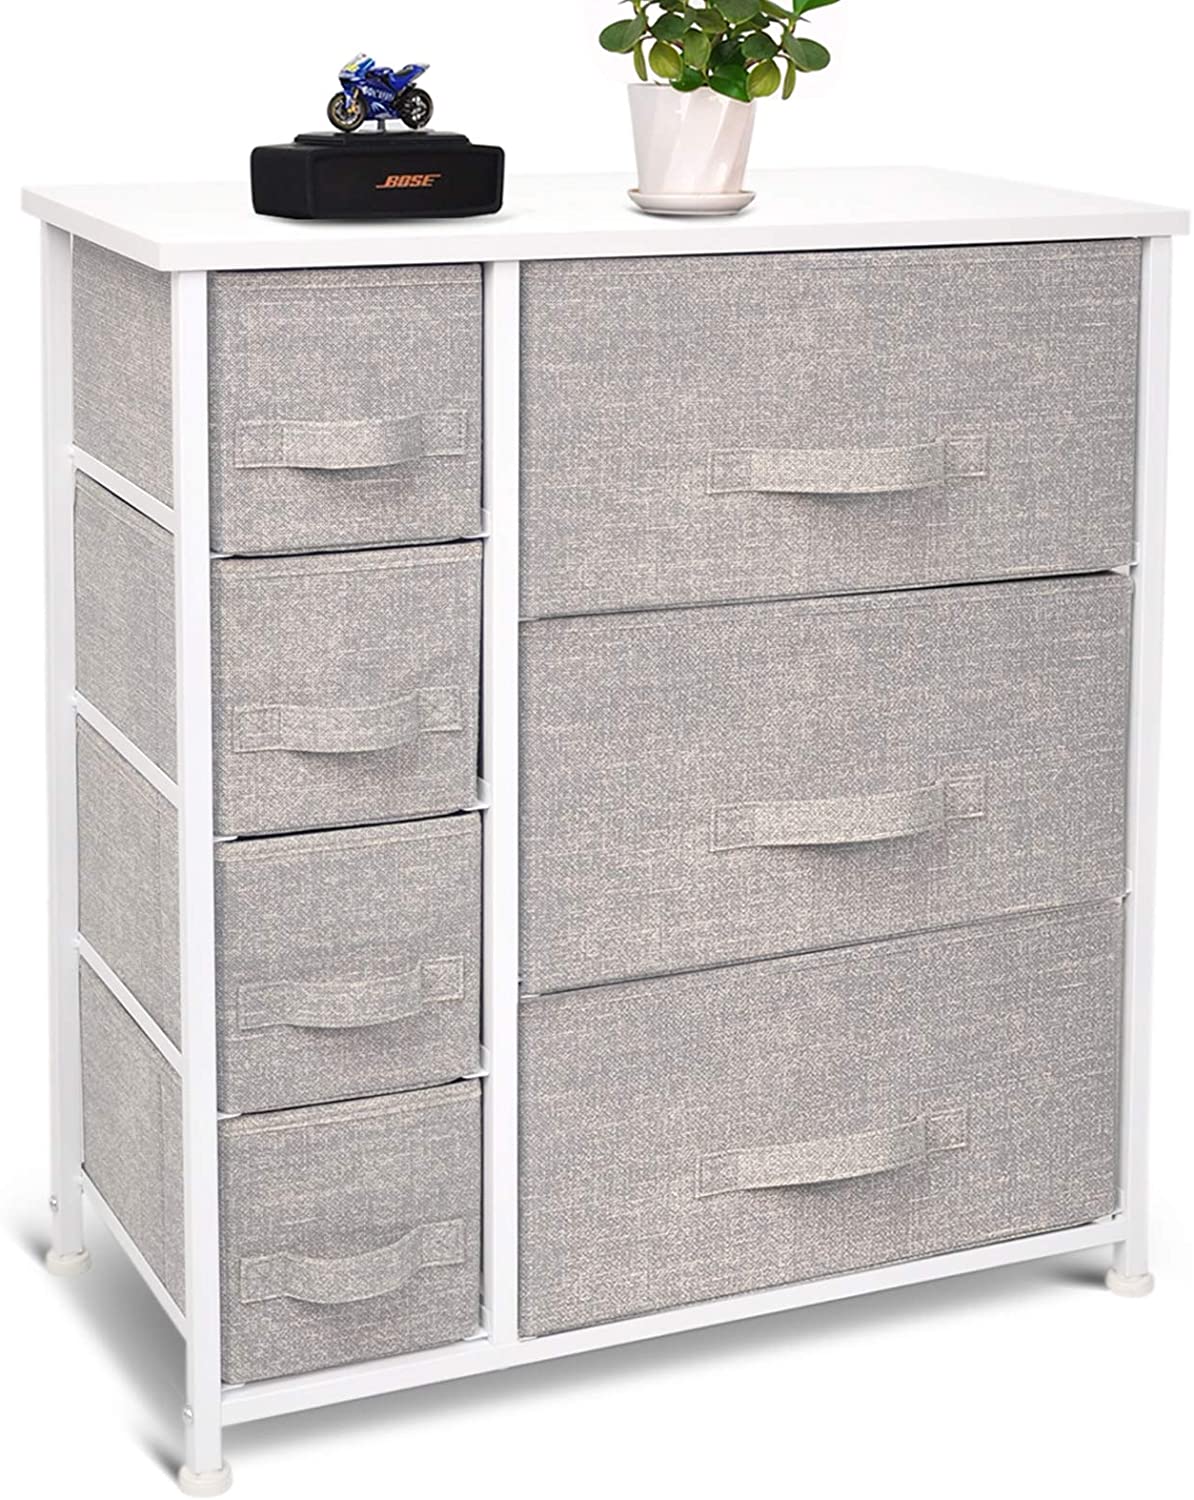 CERBIOR Drawer Dresser Storage Organizer 7-Drawer Closet Shelves, Sturdy Steel Frame Wood Top with Easy Pull Fabric Bins for Clothing, Blankets (7-Grey Drawers)